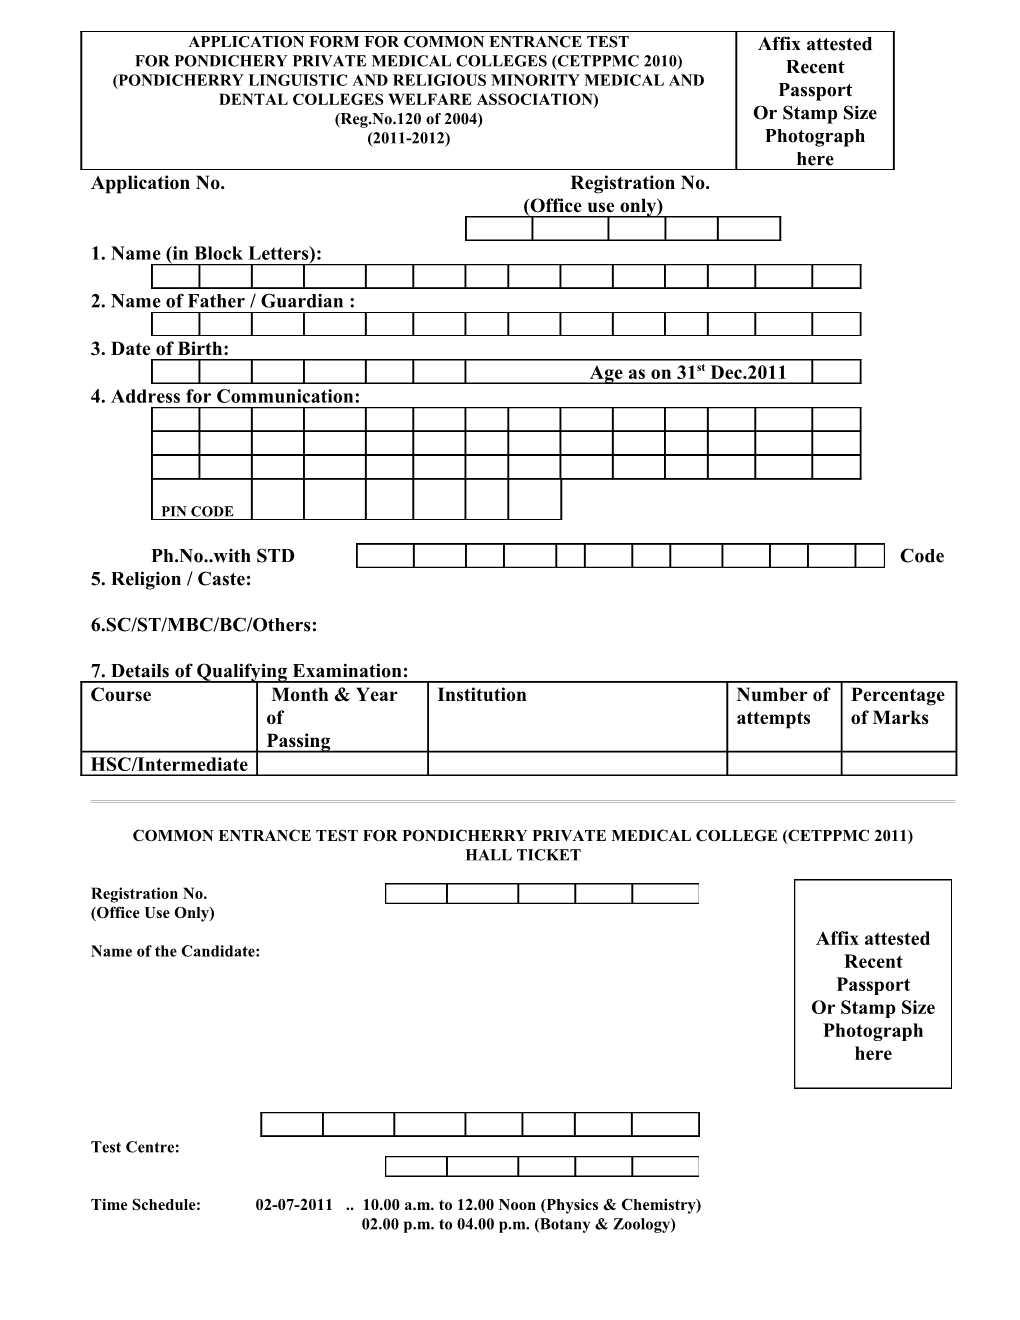 Application Form for Common Entrance Test